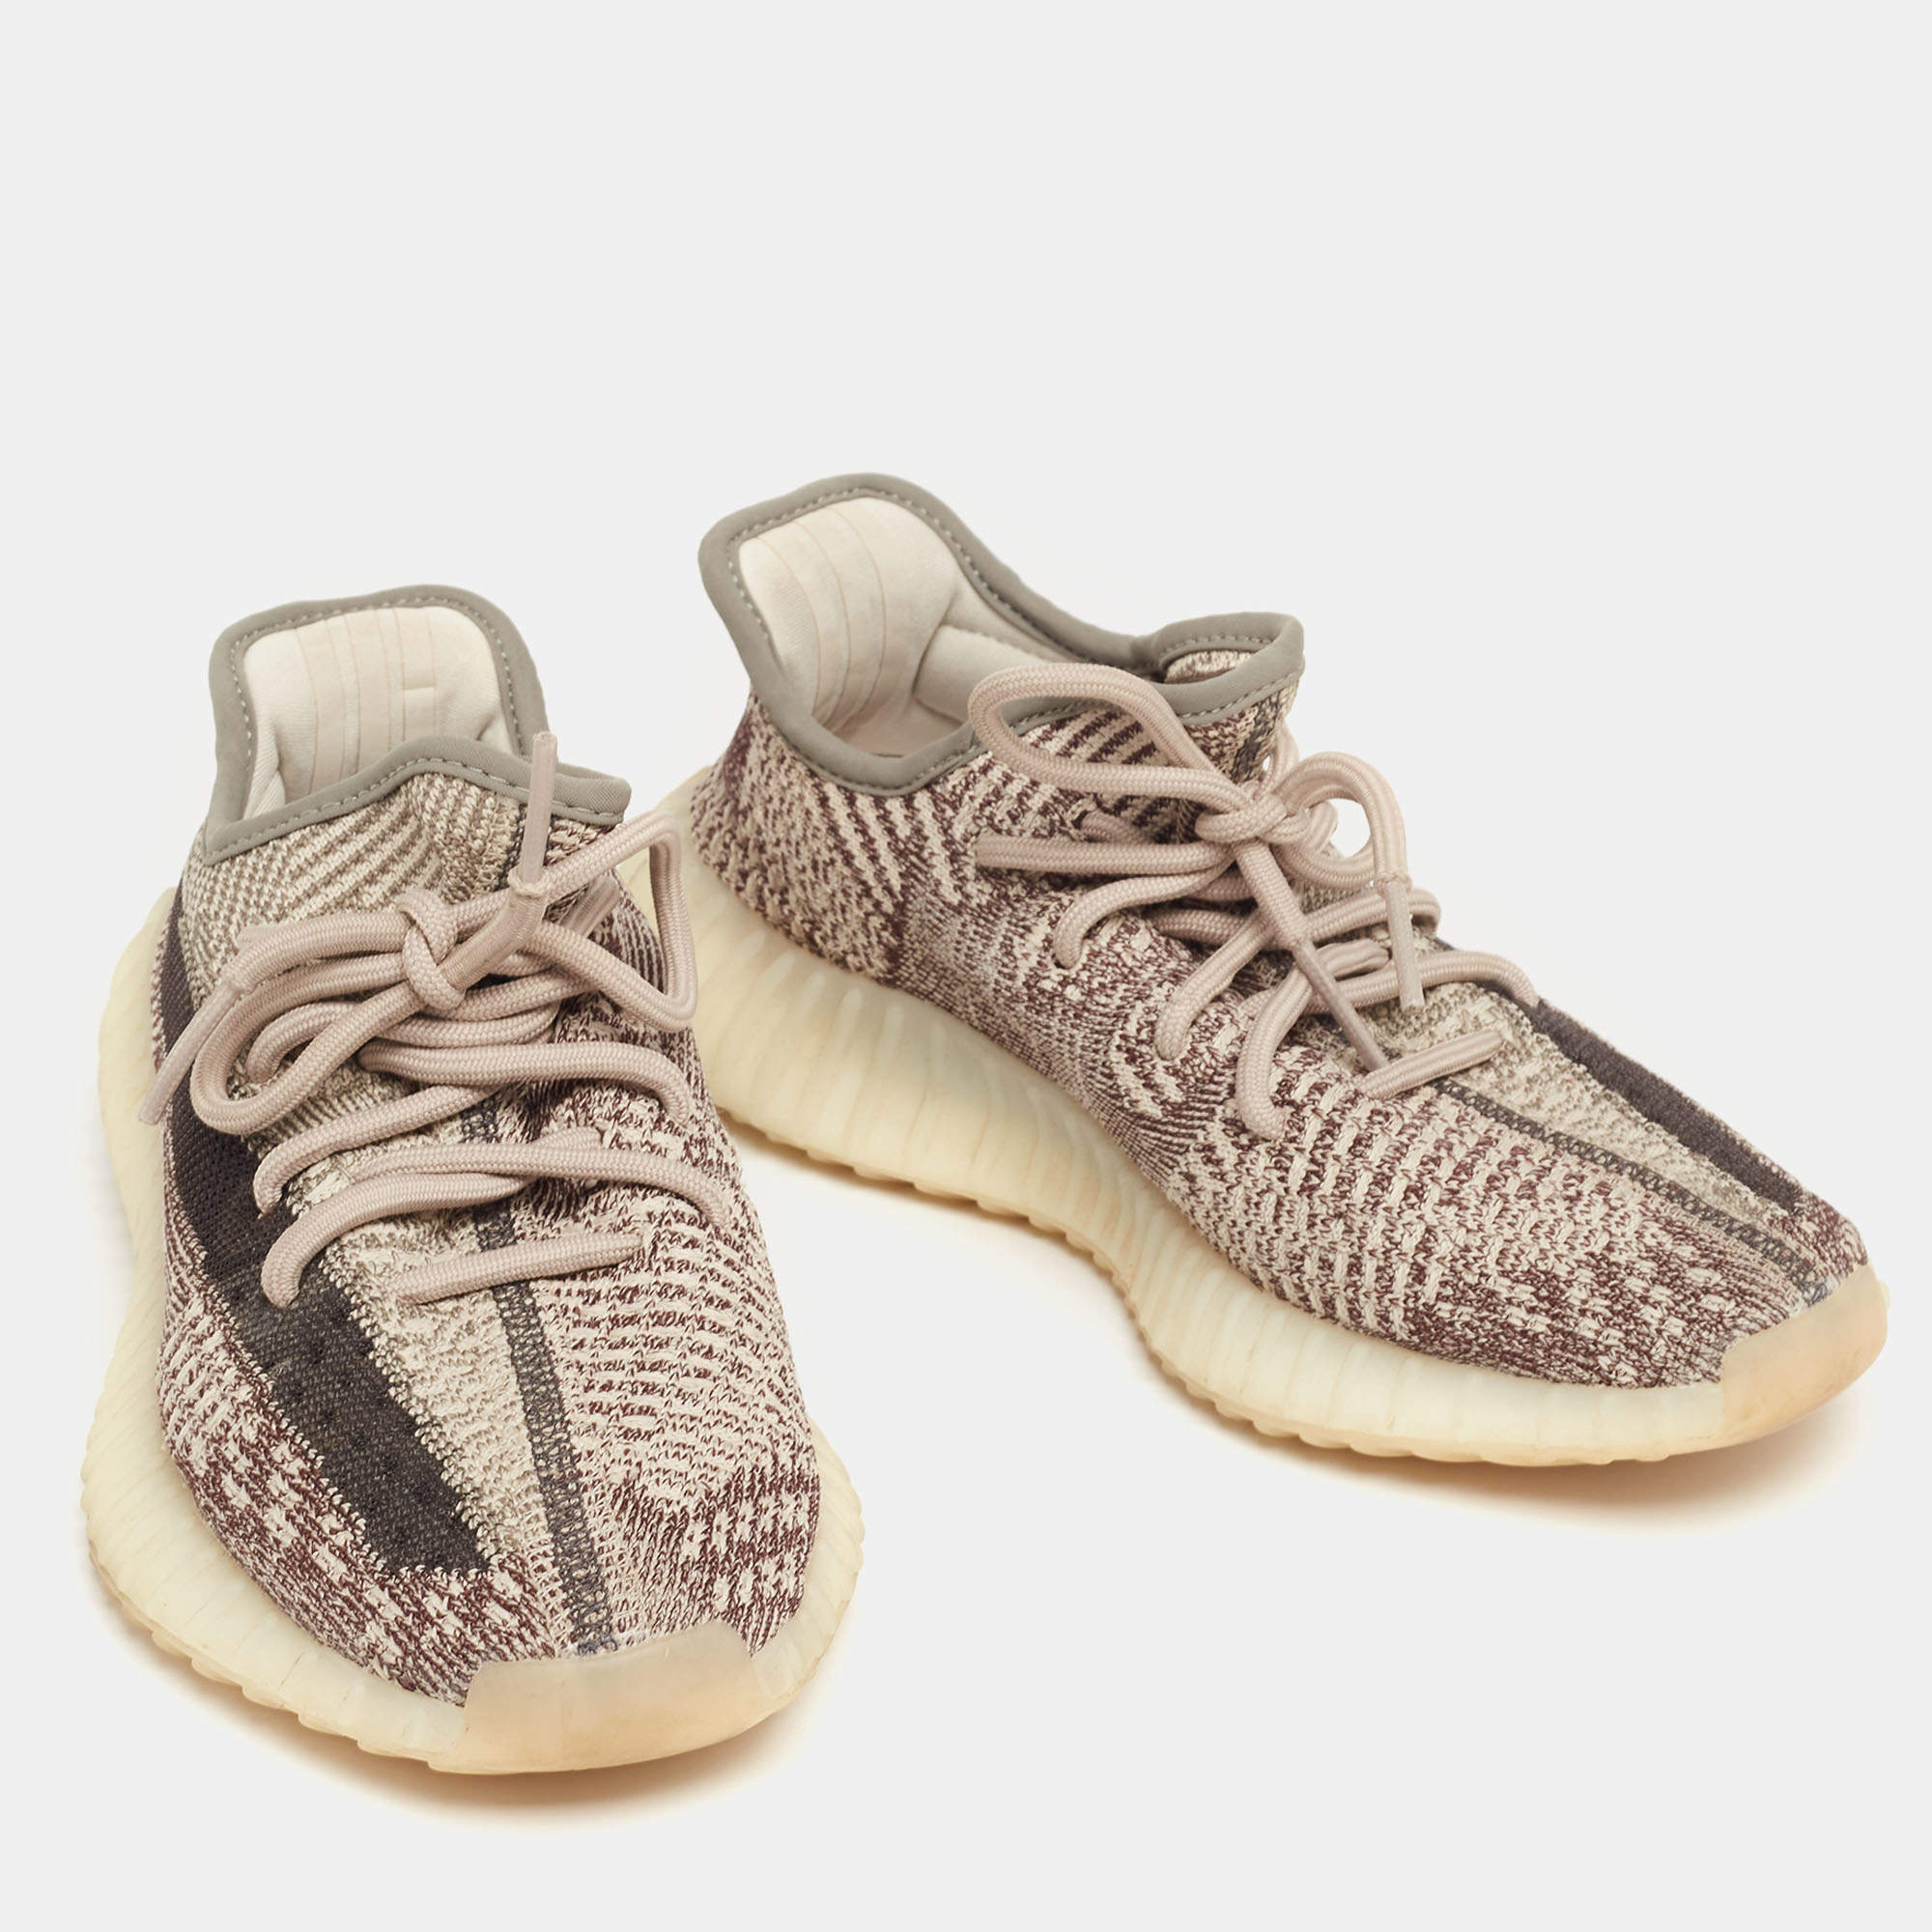 Adidas x Yeezy Brown/Cream Knit Fabric And Mesh Boost 350 V2 Zyon Sneakers  Size 36 2/3 Yeezy x Adidas | TLC